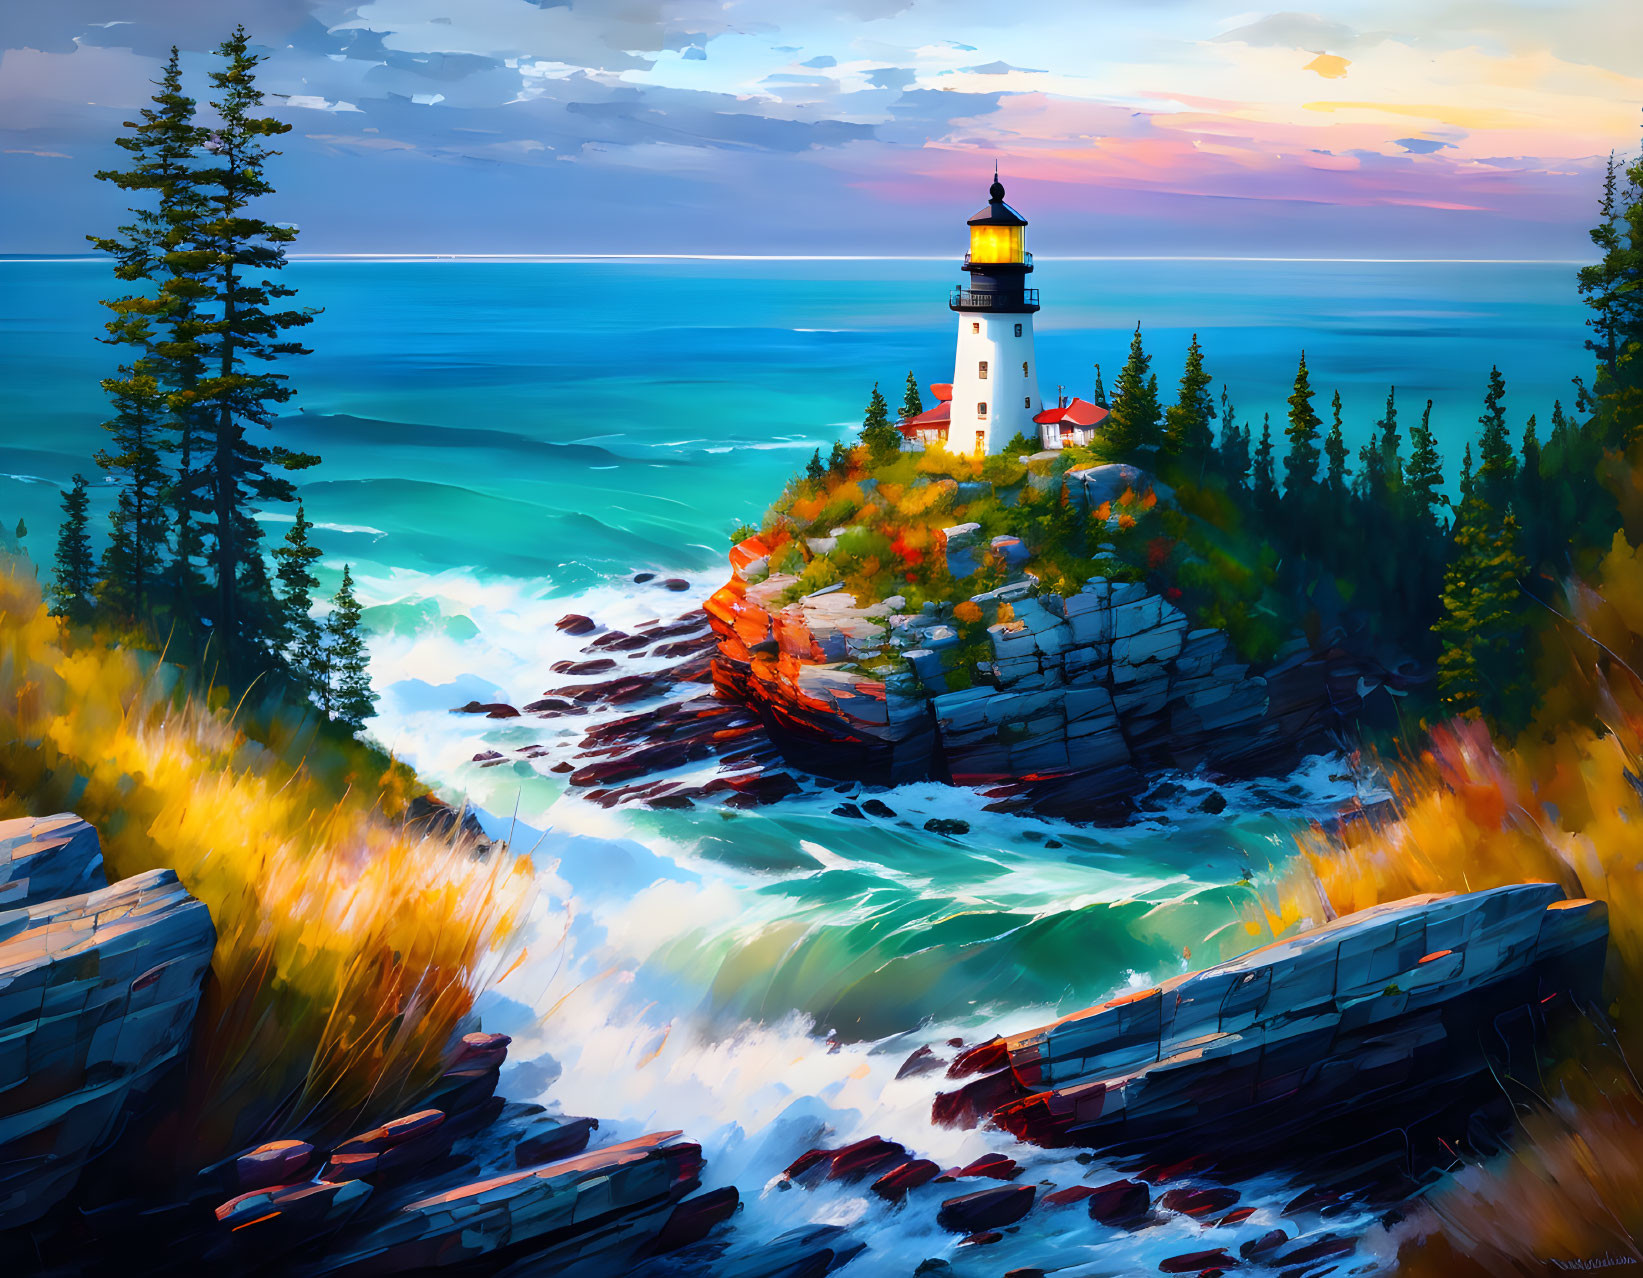 Lighthouse painting on cliff with lush greenery by turbulent sea waves